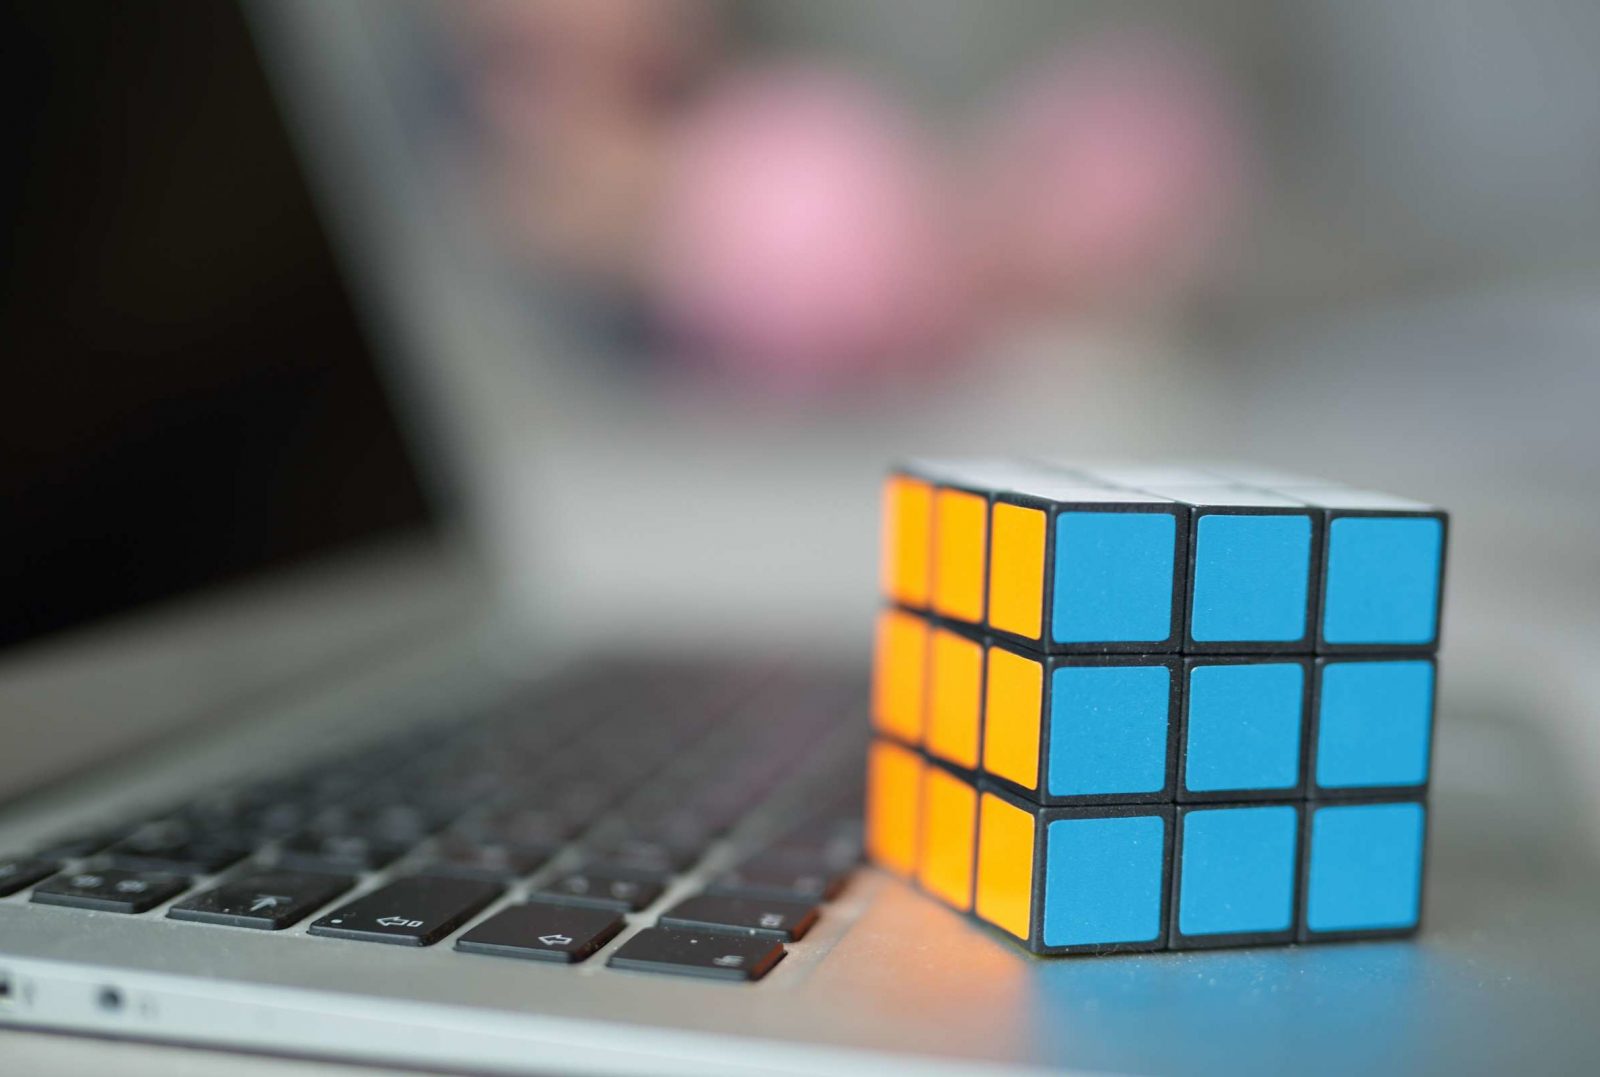 You Have 15 Questions to Prove You Have a Ton of General Knowledge Rubik's Cube